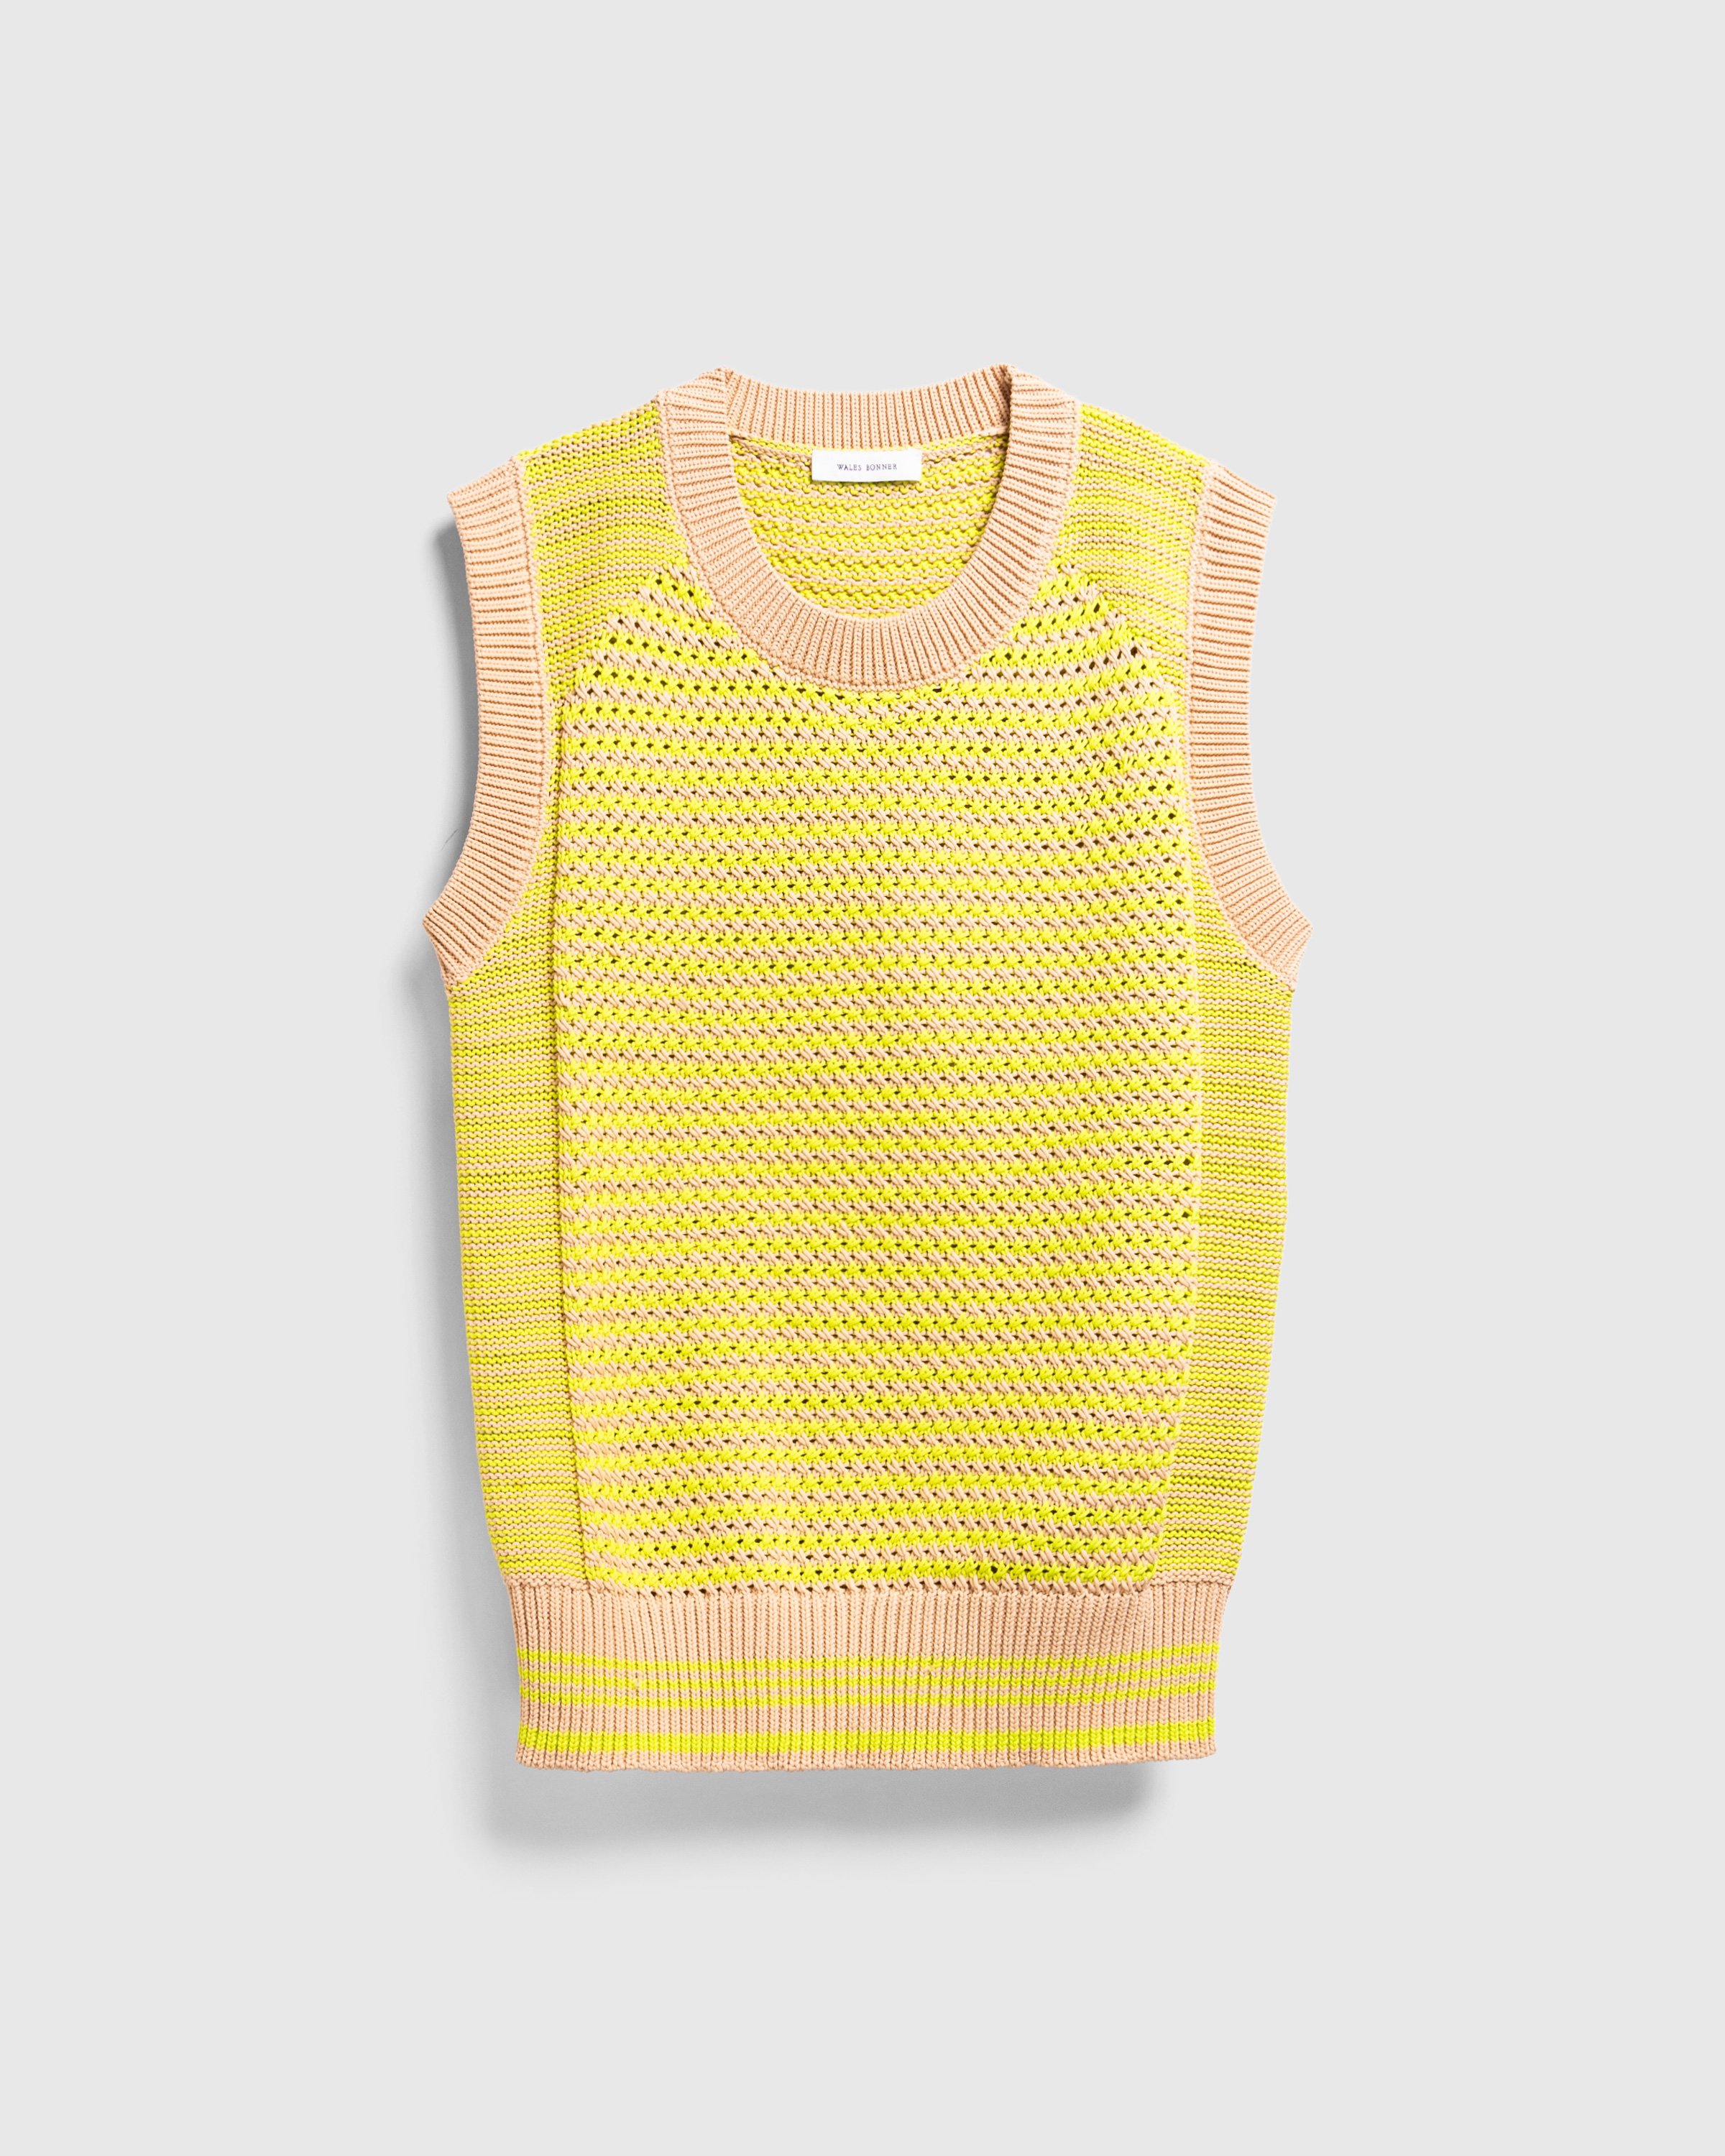 Wales Bonner - Vest Yellow - Clothing - Yellow - Image 1